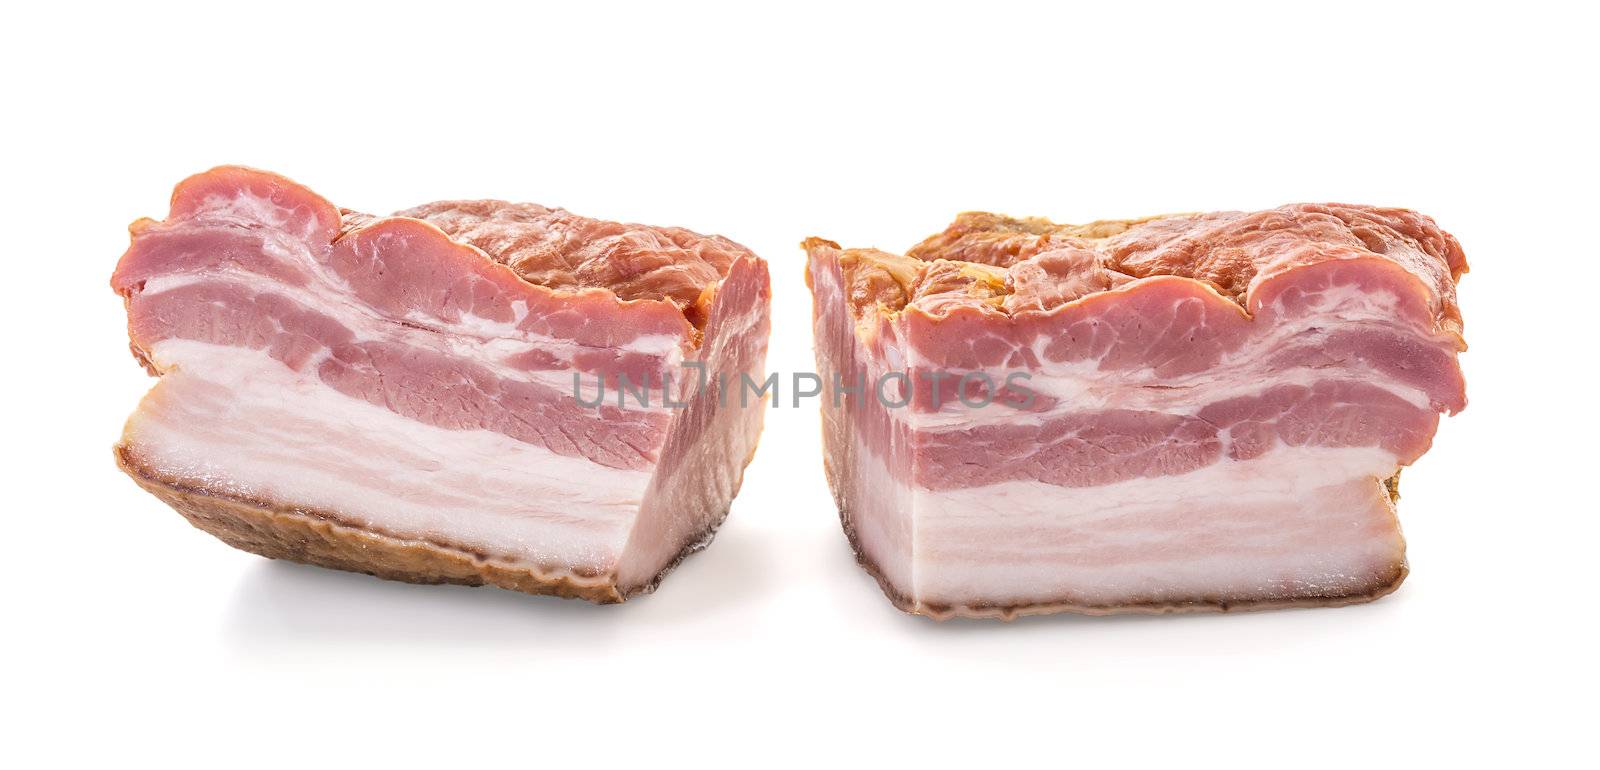 Closeup of Two Big Cuts of Smoked Bacon over White Background, shallow focus, horizontal shot